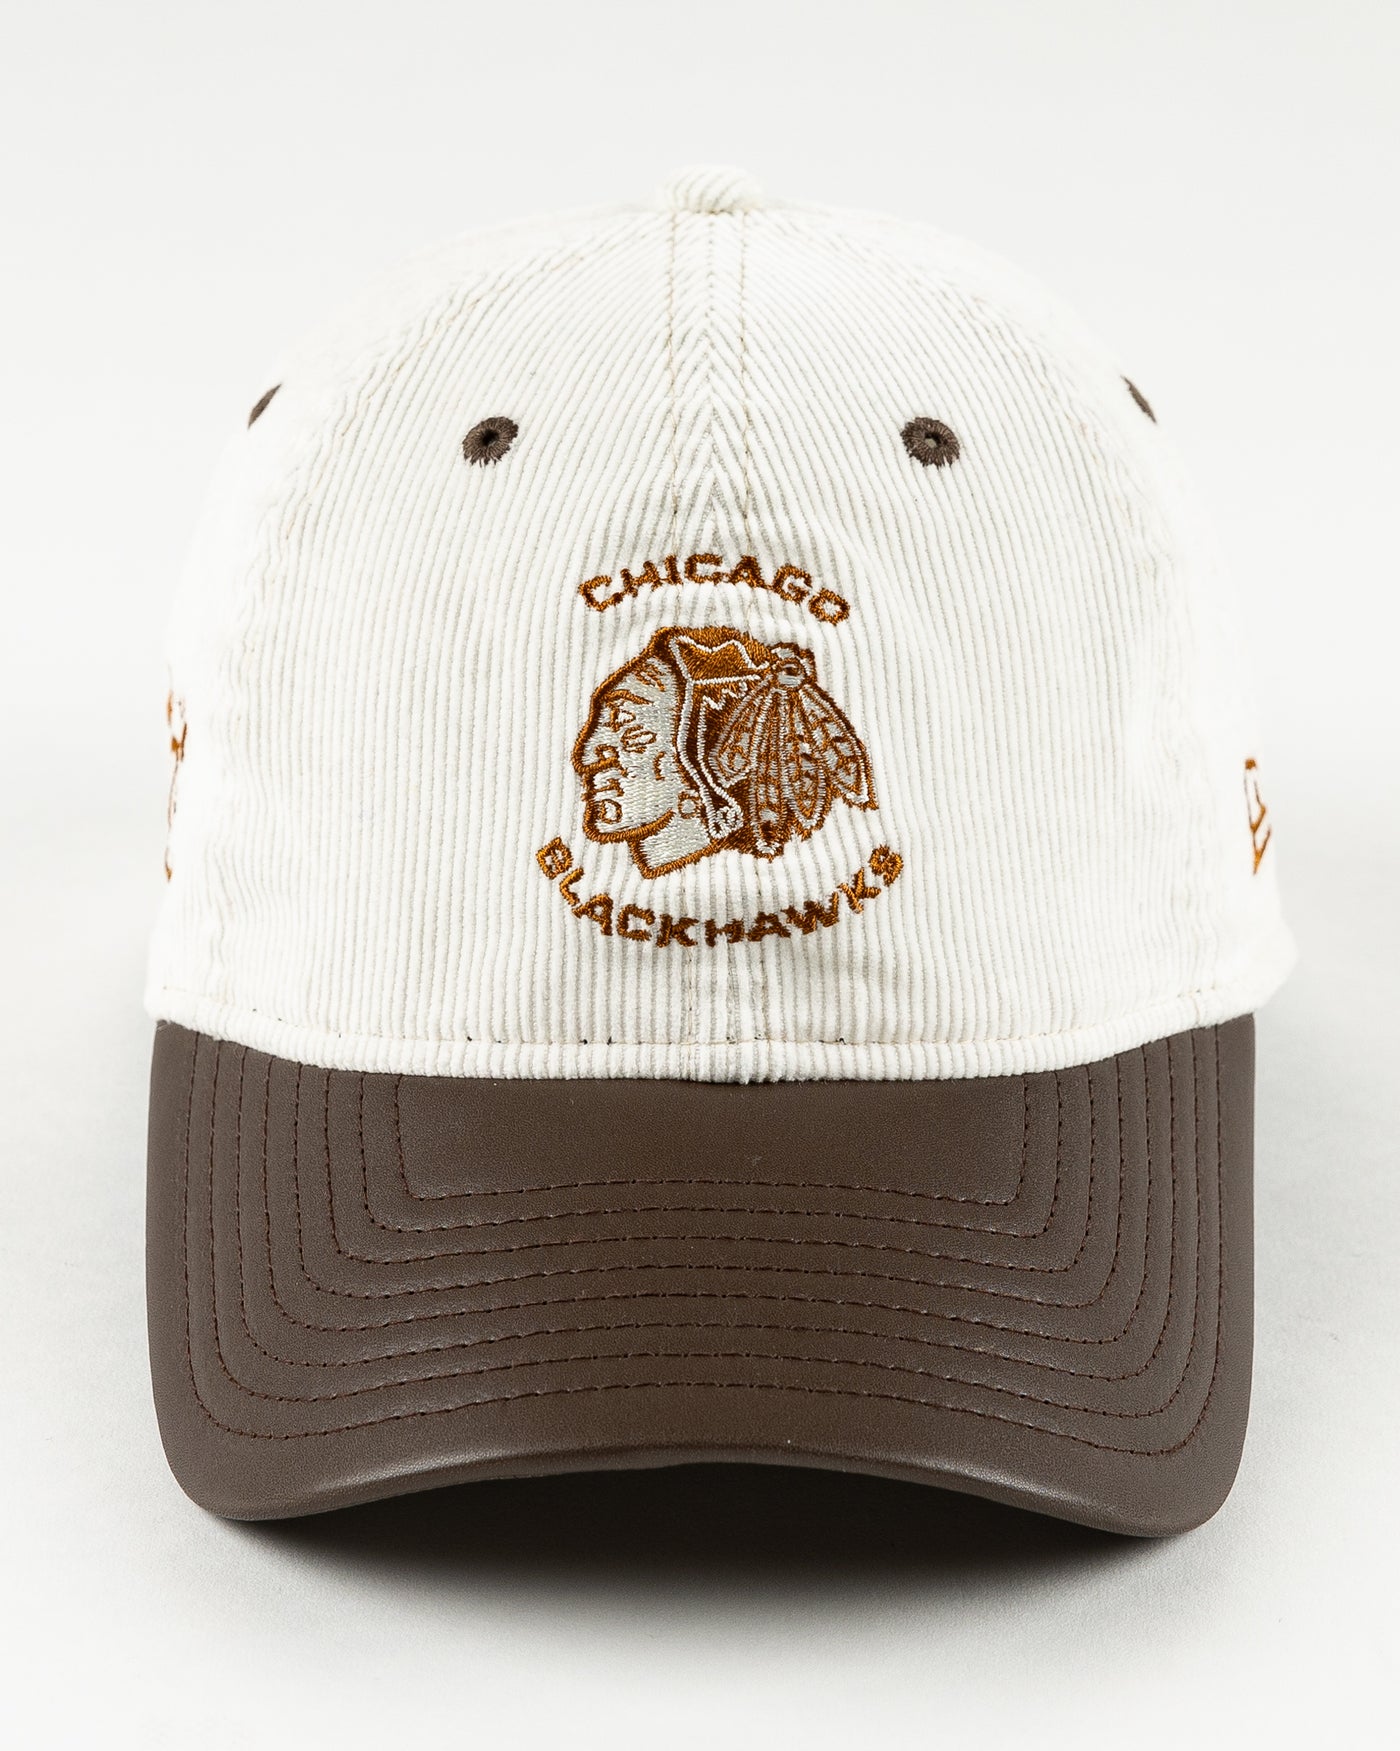 cream and brown New Era adjustable cap with tonal Chicago Blackhawks logo - front lay flat